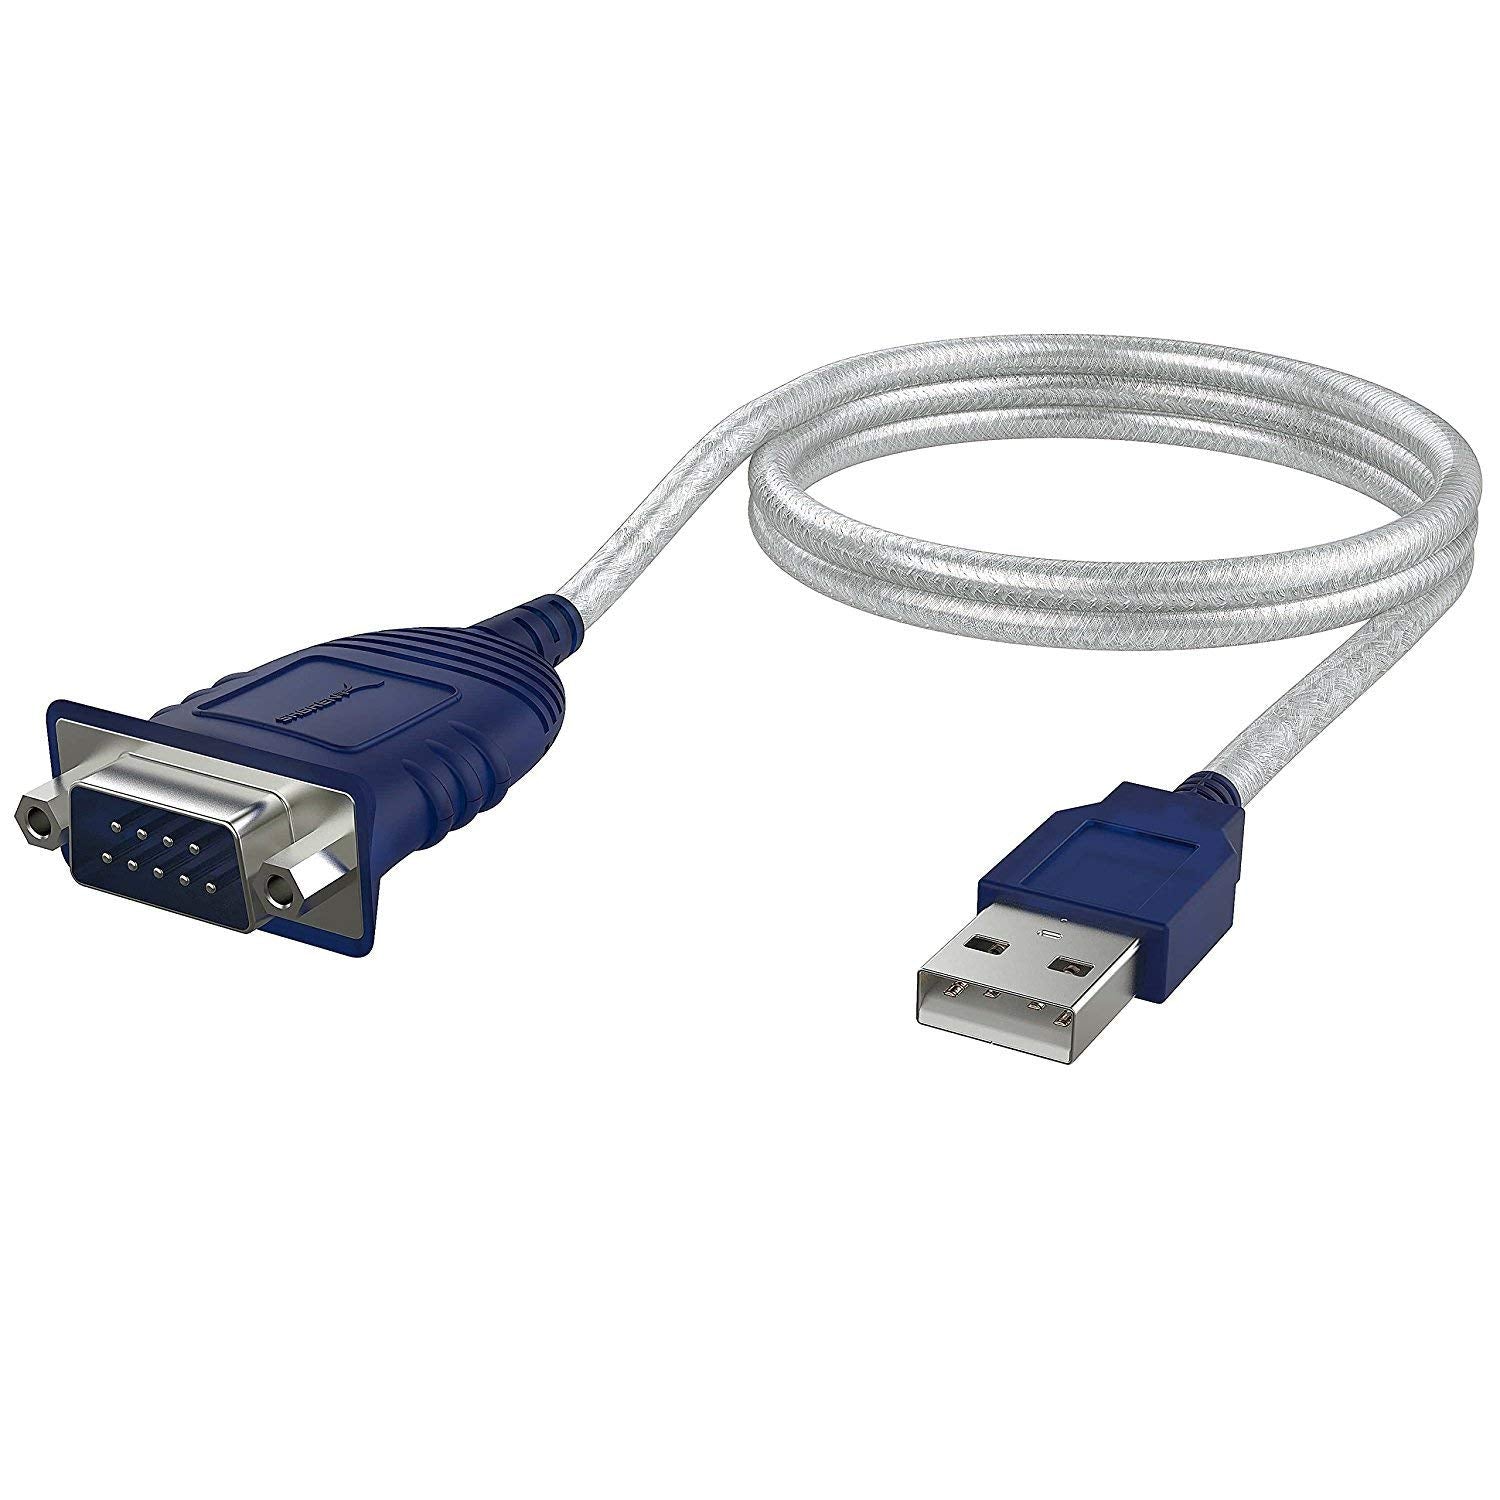 Alle Jane Austen det er nytteløst USB 2.0 To Serial DB9 Male (9 Pin) RS232 Cable Adapter - Sabrent